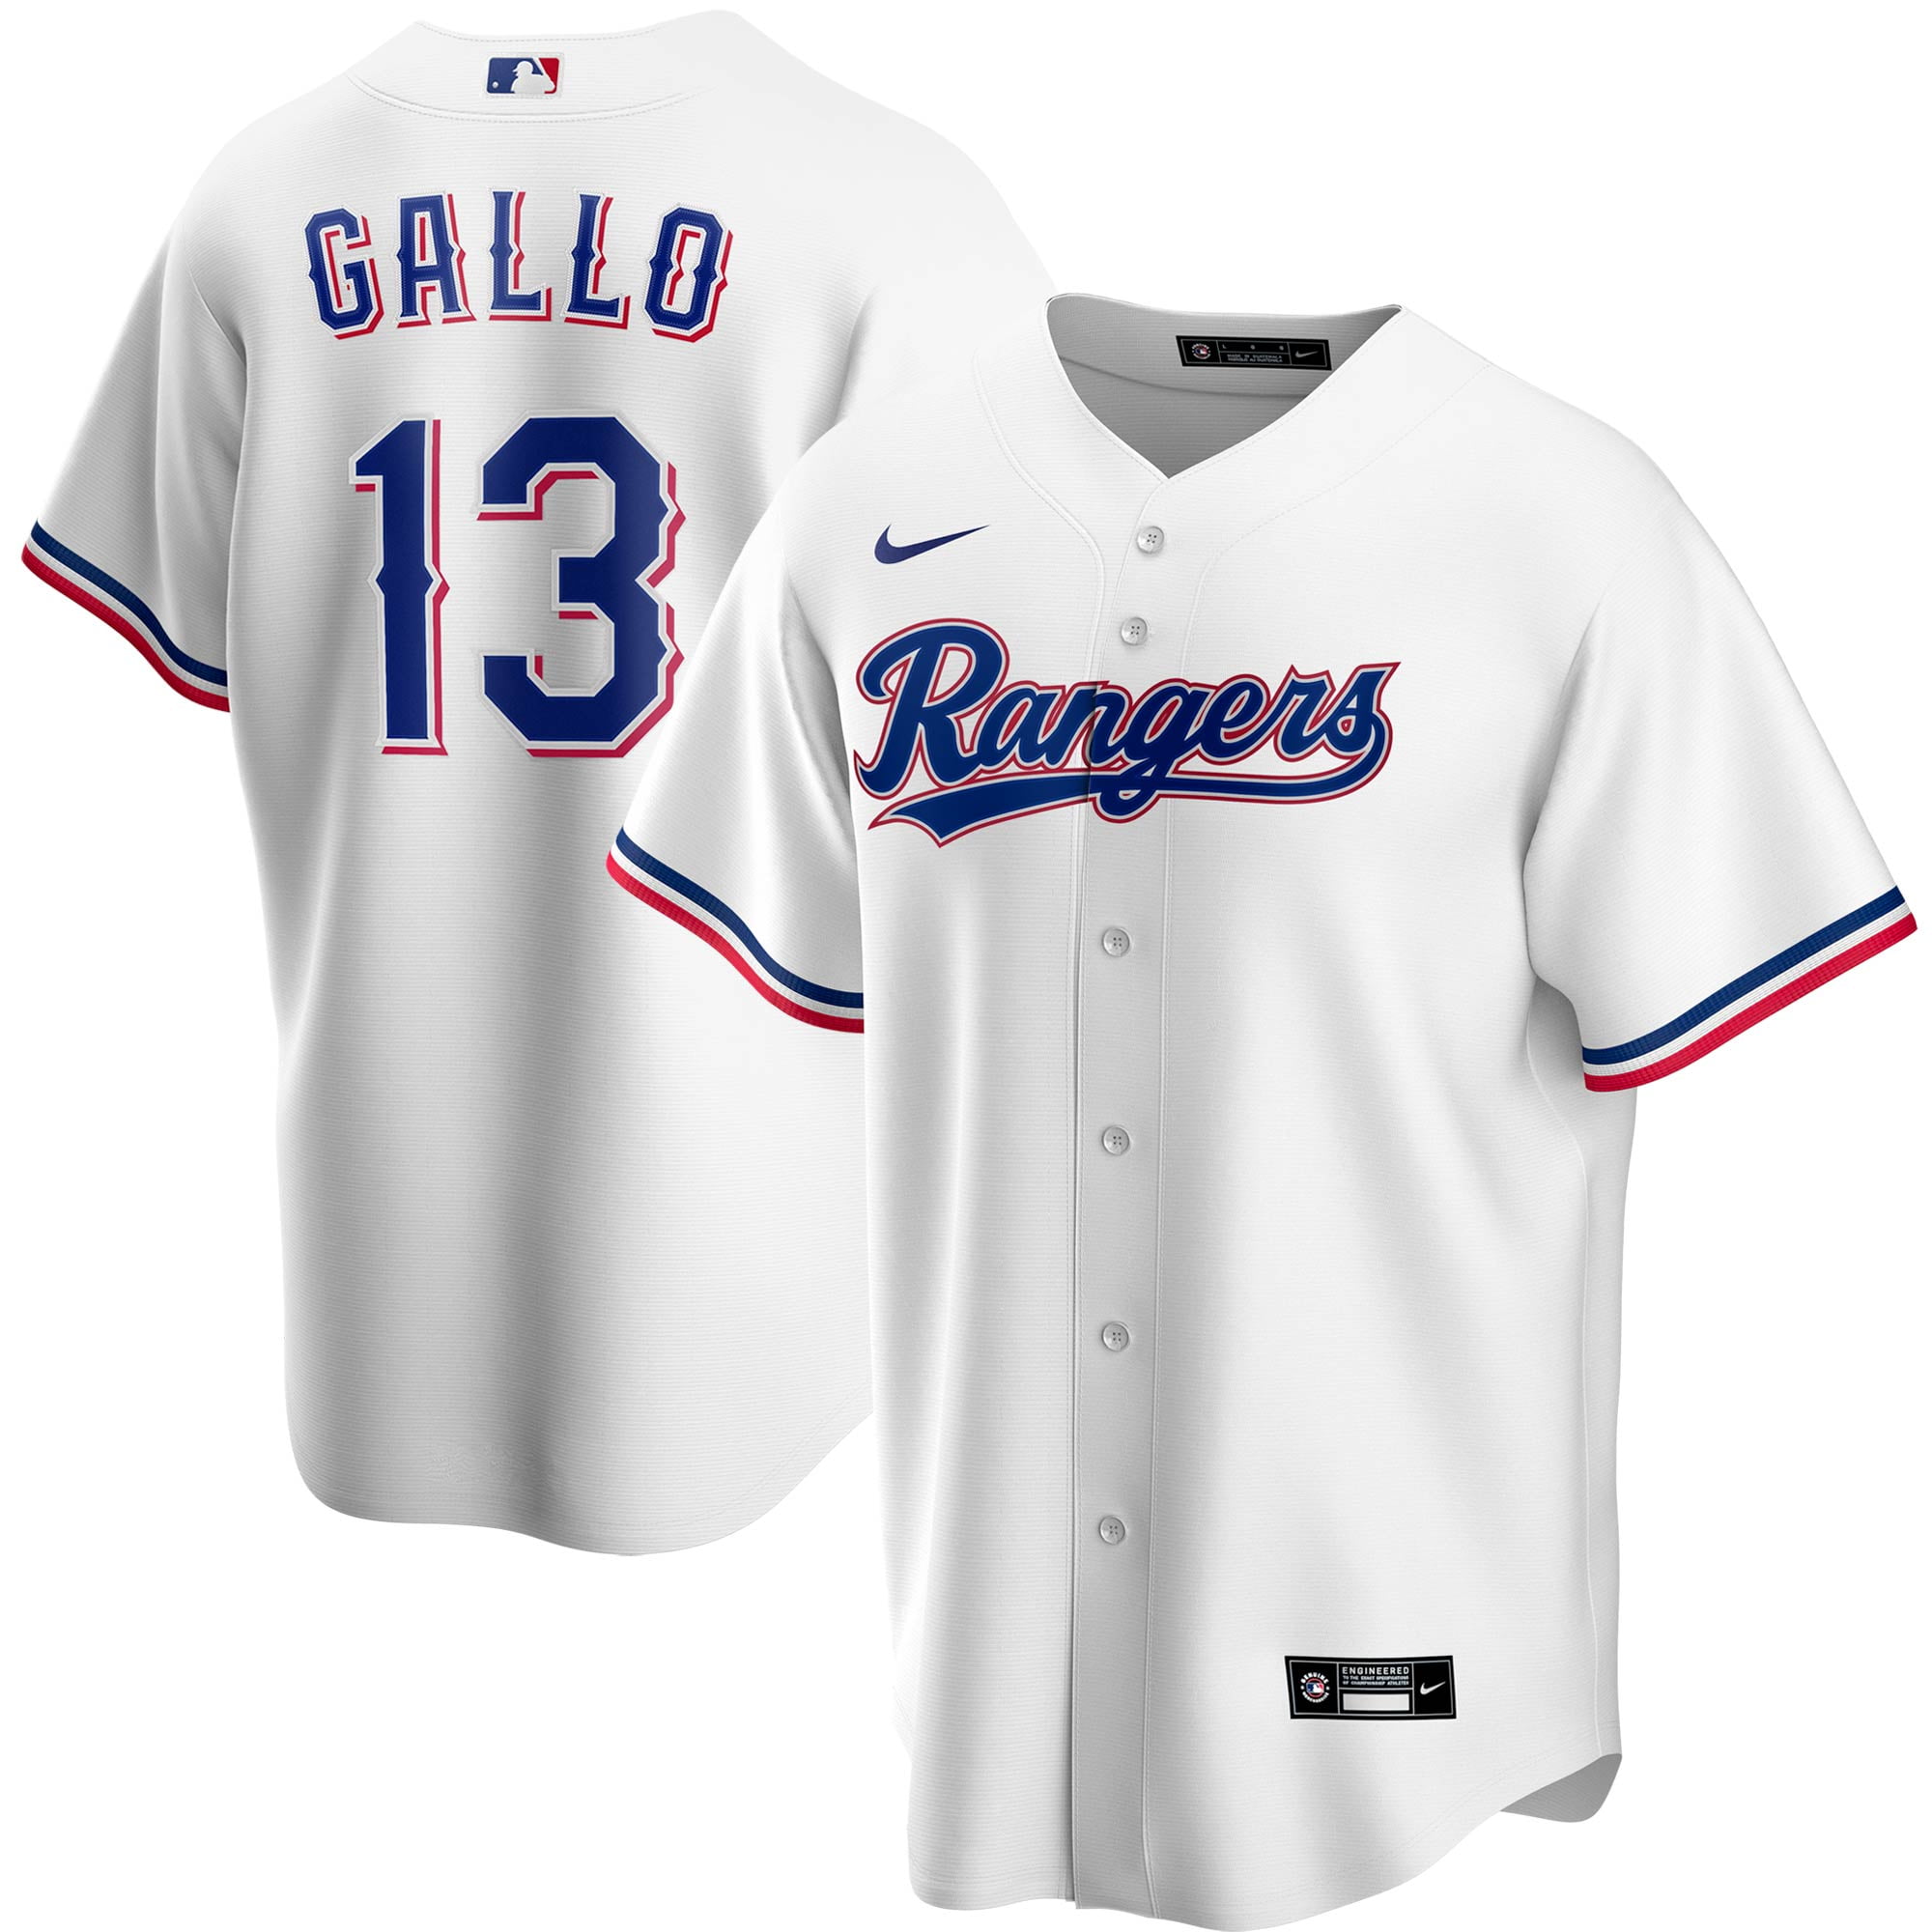 joey gallo jersey number